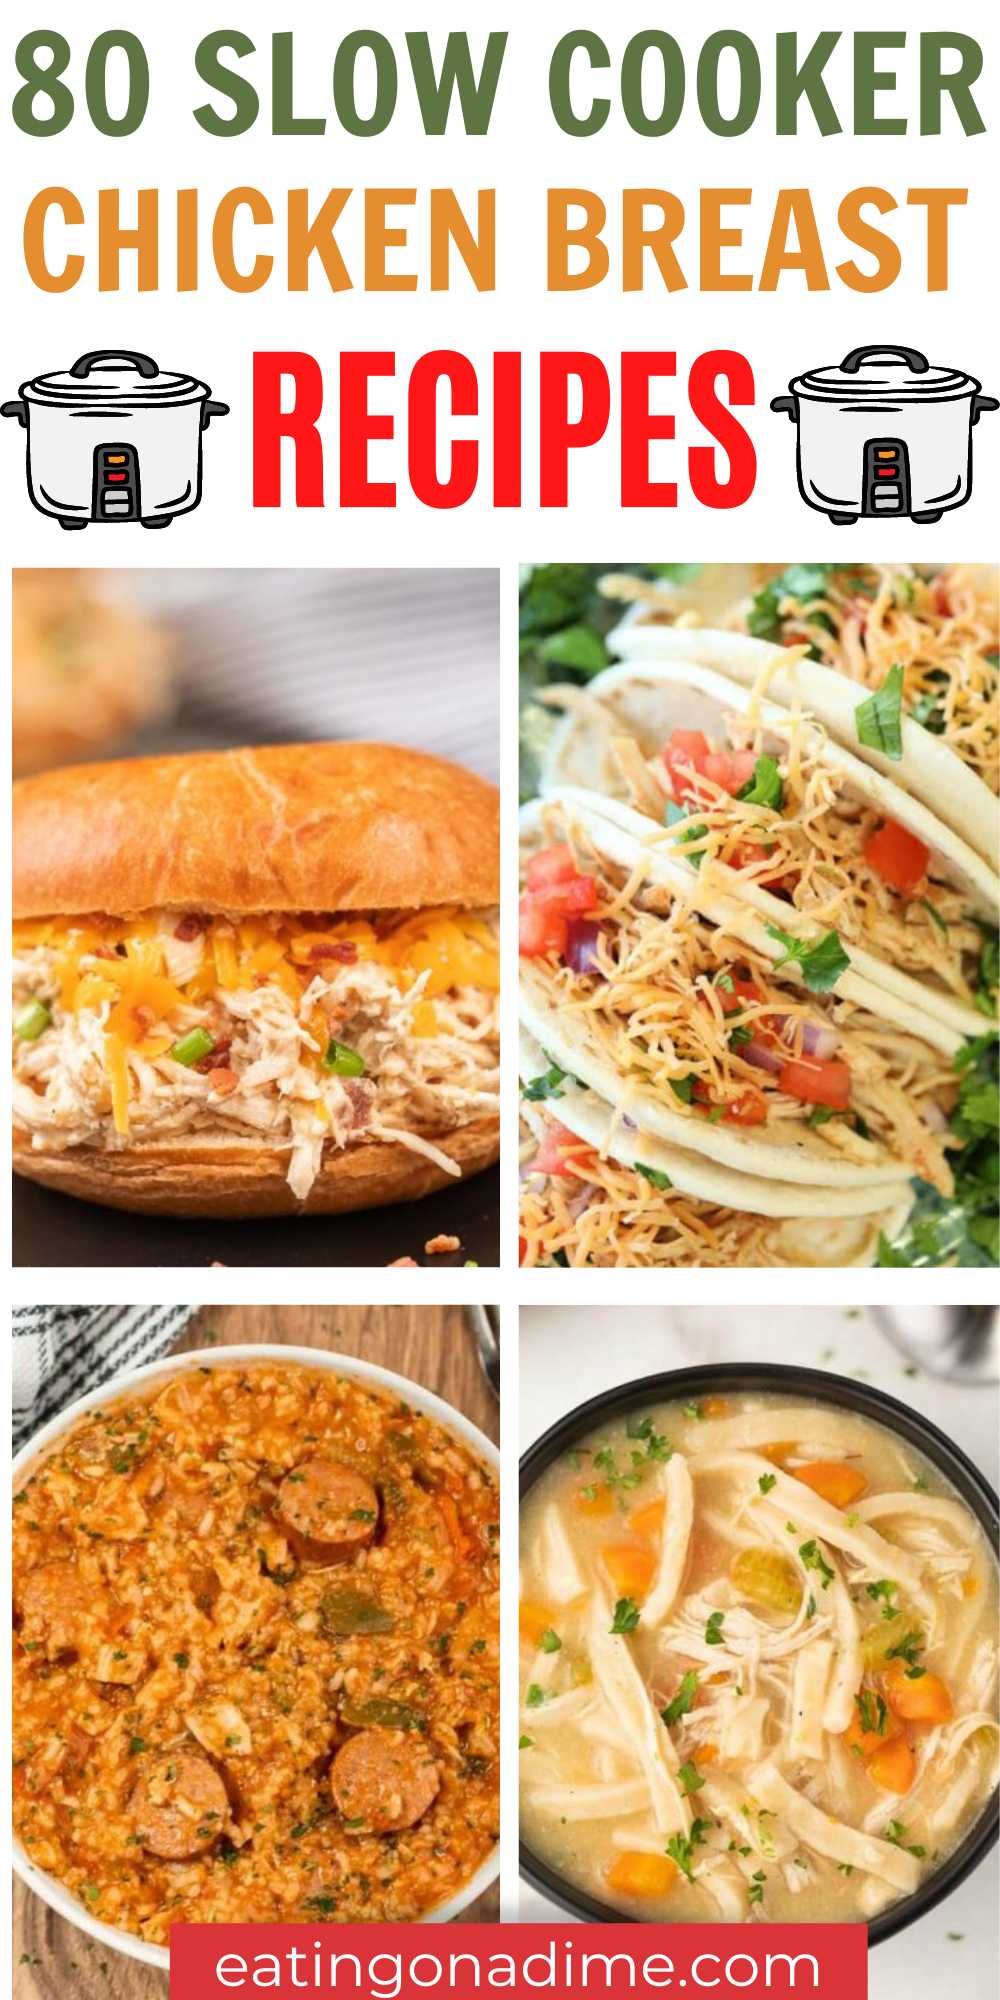 Crockpot Chicken Breast Recipes that will make dinner time a breeze. 80 of the best recipes using boneless skinless chicken. Boneless Skinless Chicken Breast can be placed in as frozen chicken or shredded chicken breast to make a delicious flavorful meal. #eatingonadime #chickenbreastrecipes #crockpotrecipes